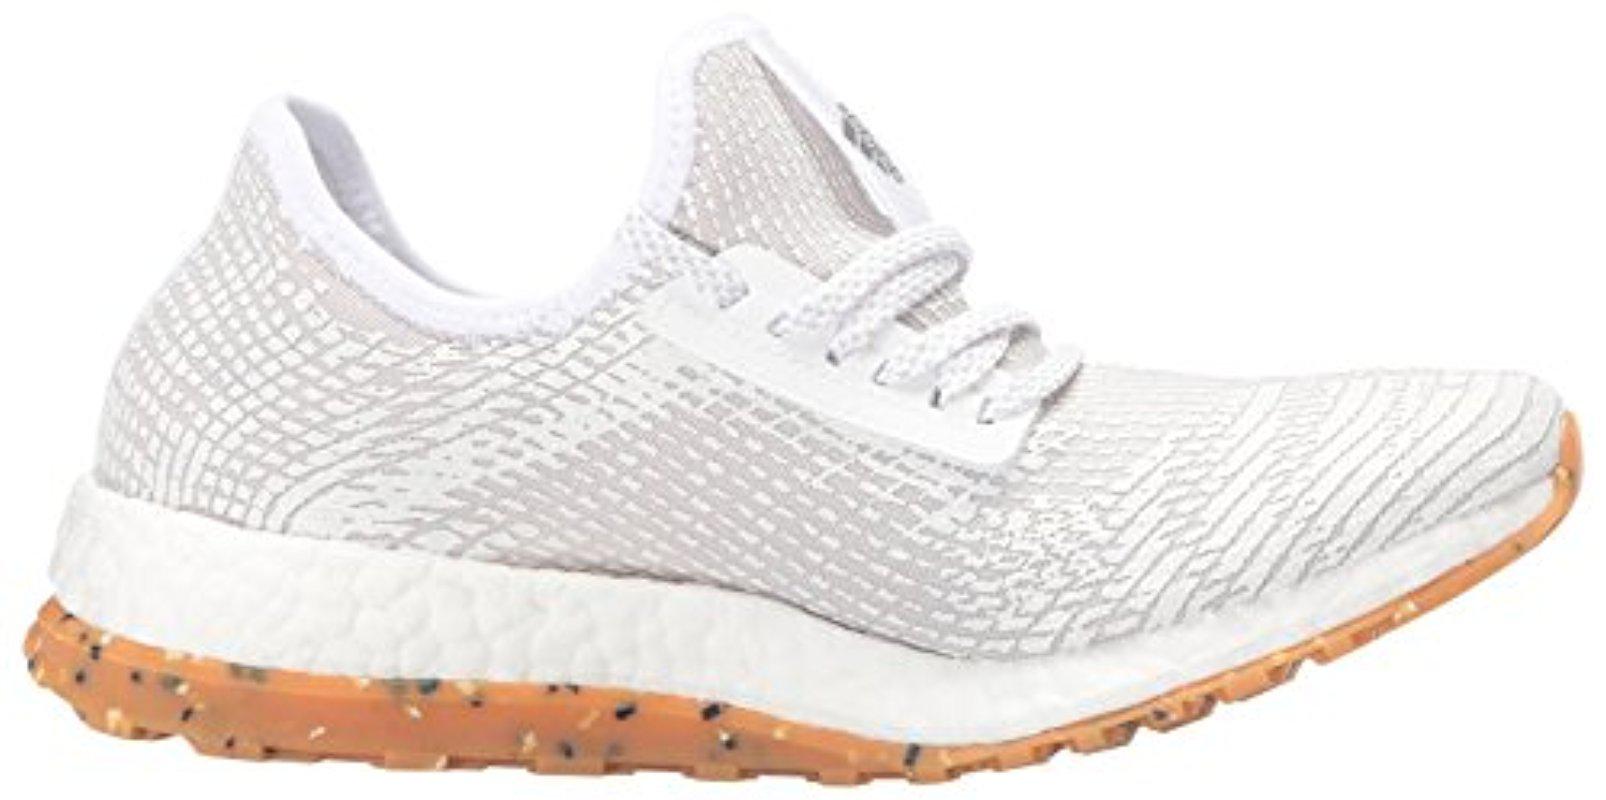 adidas Rubber Performance Pureboost X Atr Running Shoe in White/Crystal  White Pearl Grey s (White) | Lyst